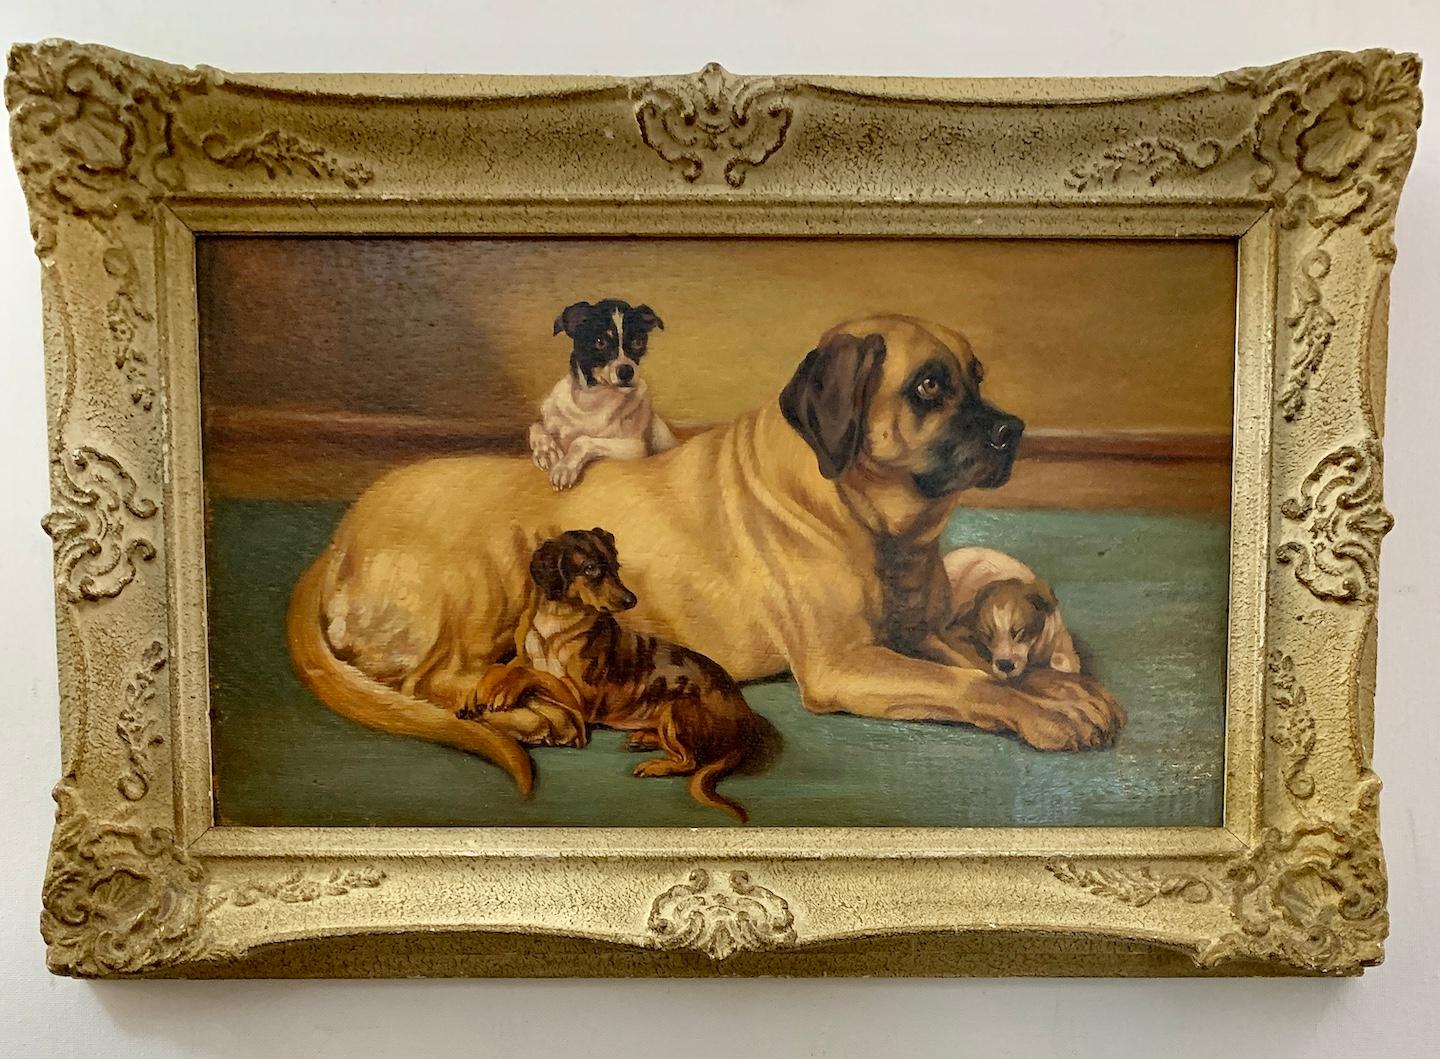 19th Century English School Animal Painting - Late 19th century English portrait of a dog with her puppies in an interior